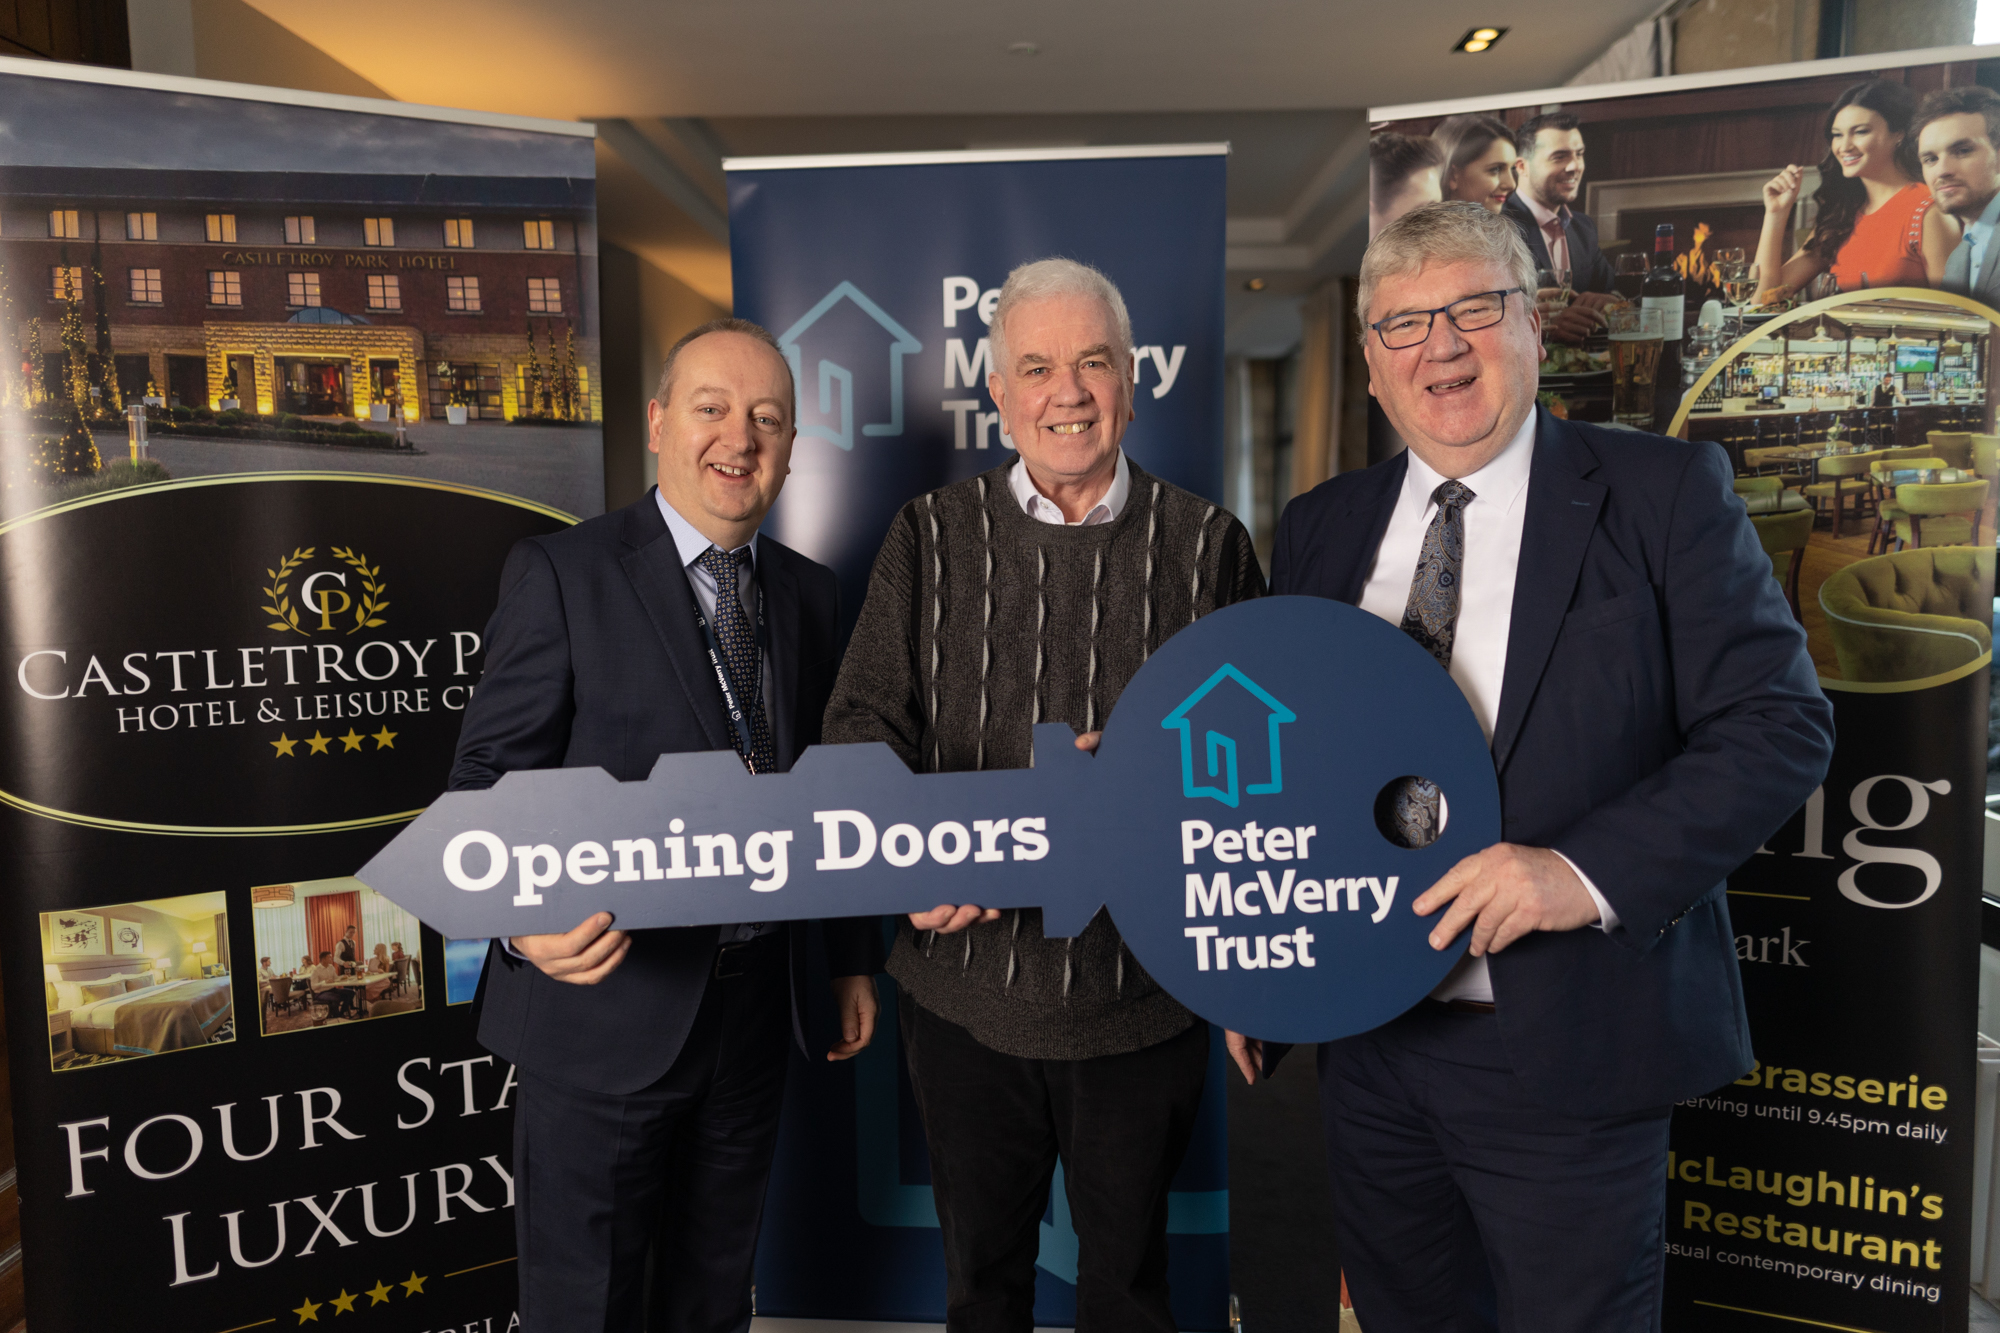 Pat Doyle, CEO Peter McVerry Trust, Fr Peter McVerry and Pat McDonagh were pictured at the Peter McVerry Trust Breakfast Morning at the Castletroy Park Hotel, Limerick. Picture: Marie Keating